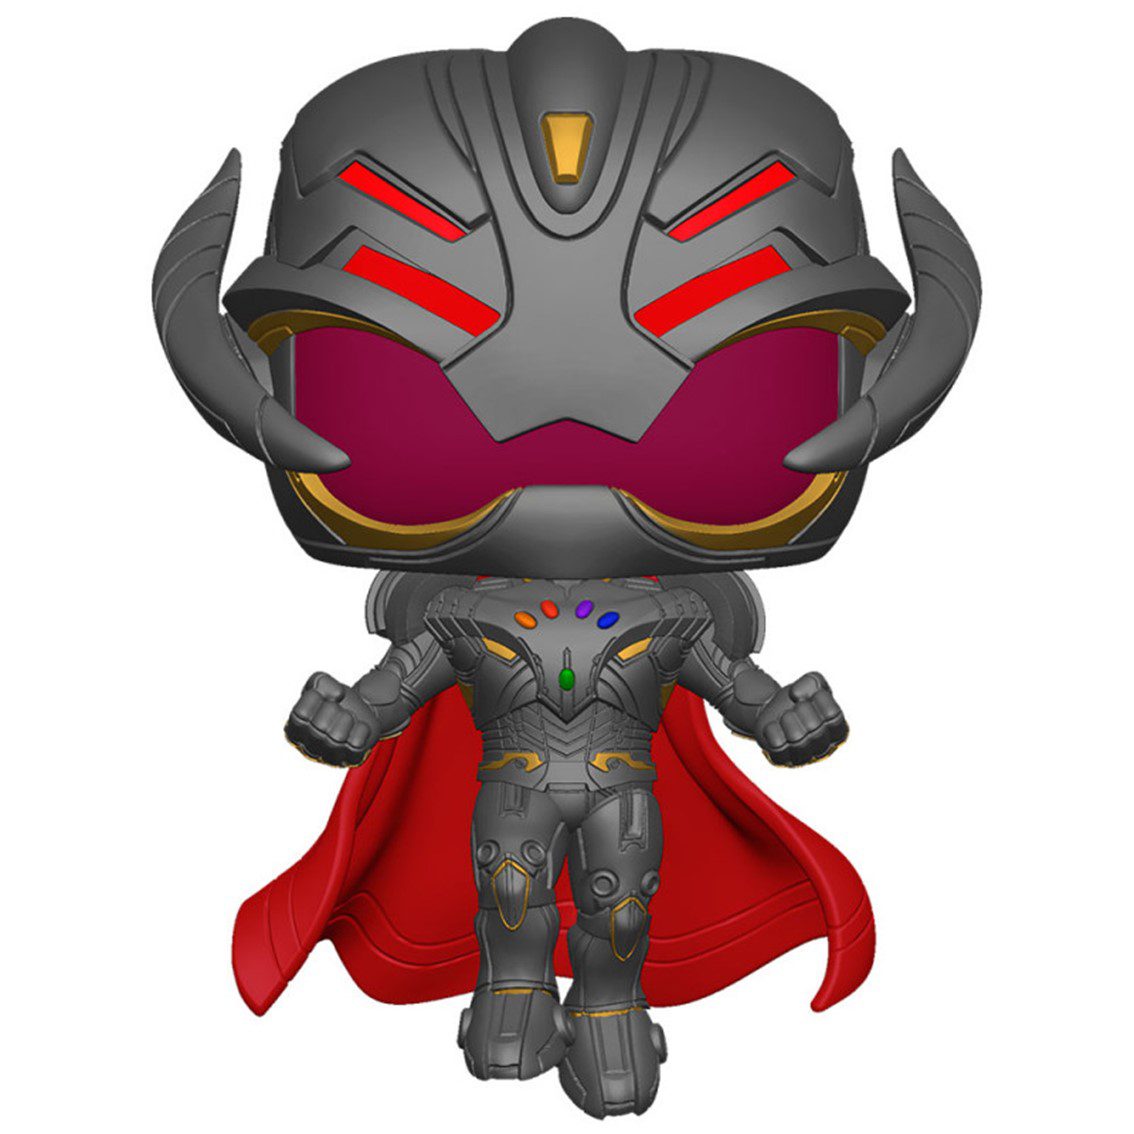 889698586481-PN-58648-Cod.-Articulo-MGS0000009959-Funko-pop-marvel-what-if-infinity-ultron-58648-2